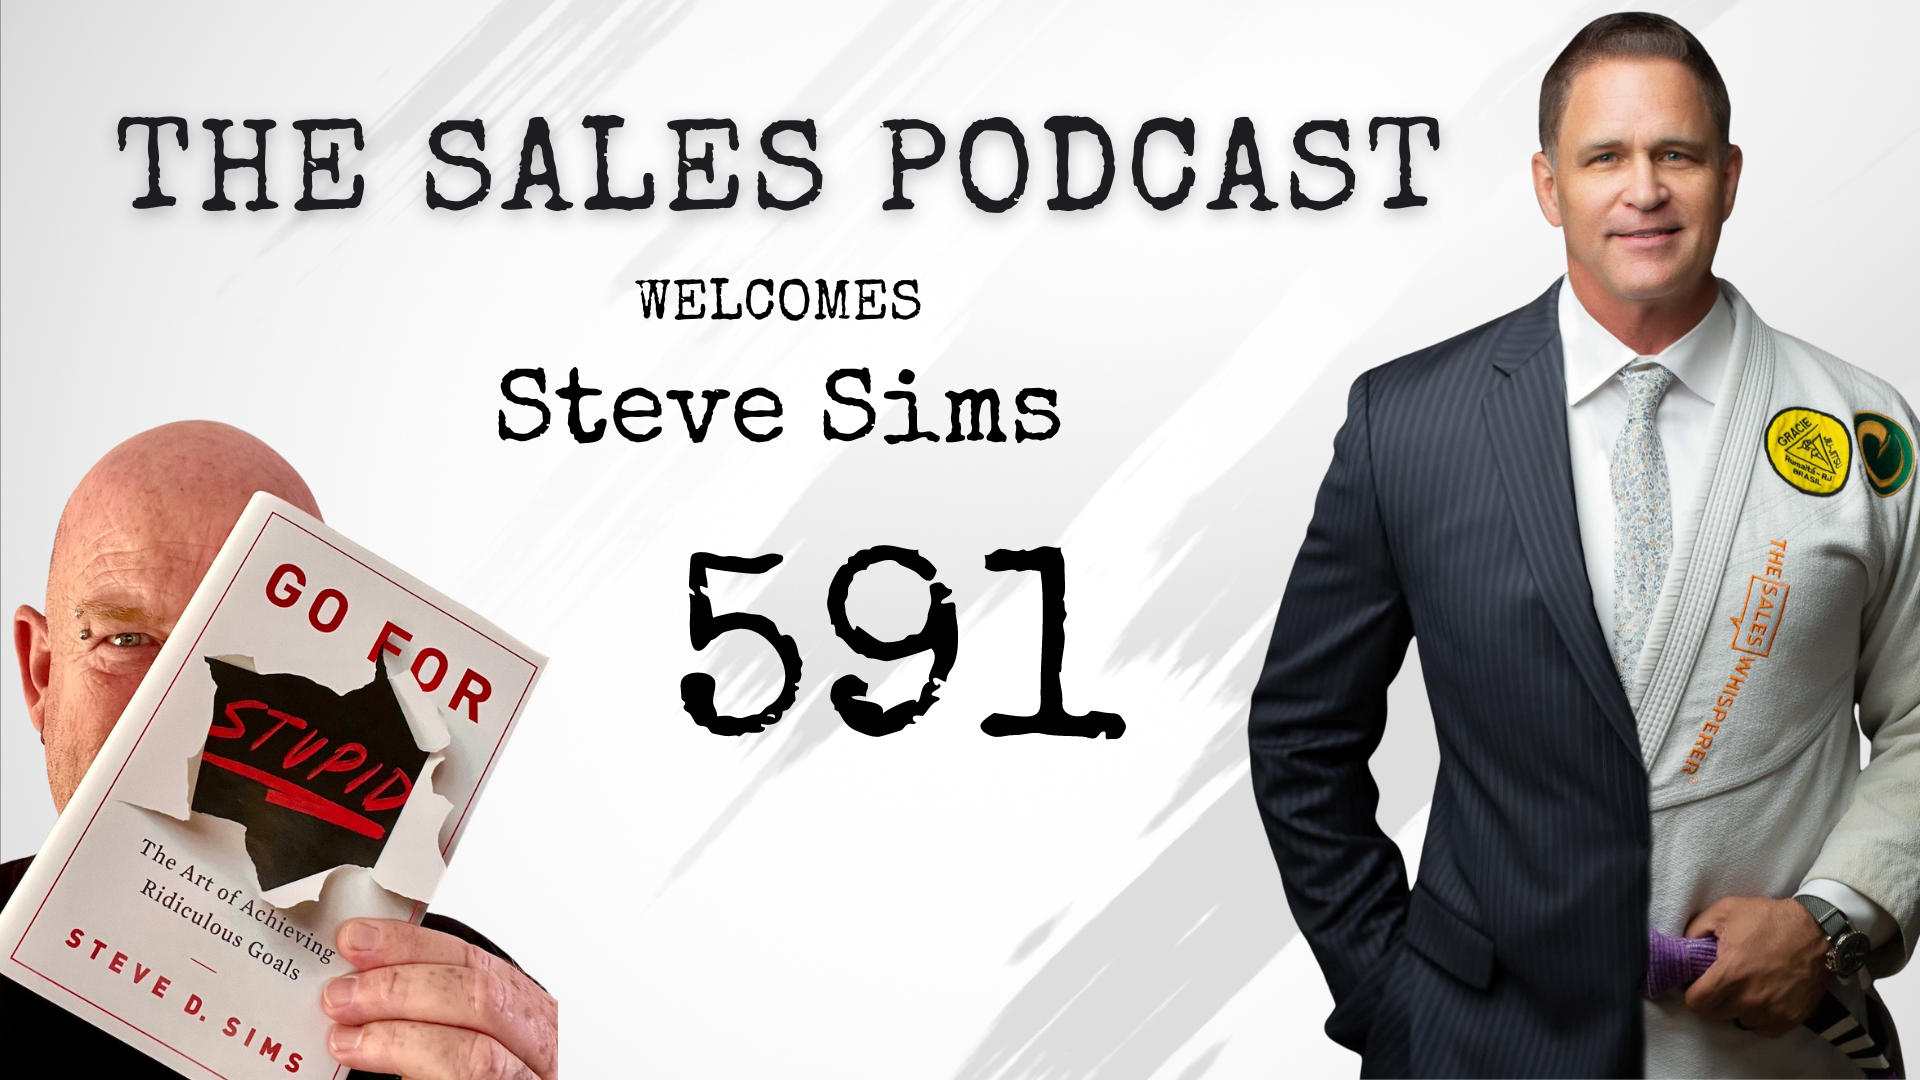 Go For Stupid With Steve Sims on The Sales Podcast with Wes Schaeffer, The Sales Whisperer® 